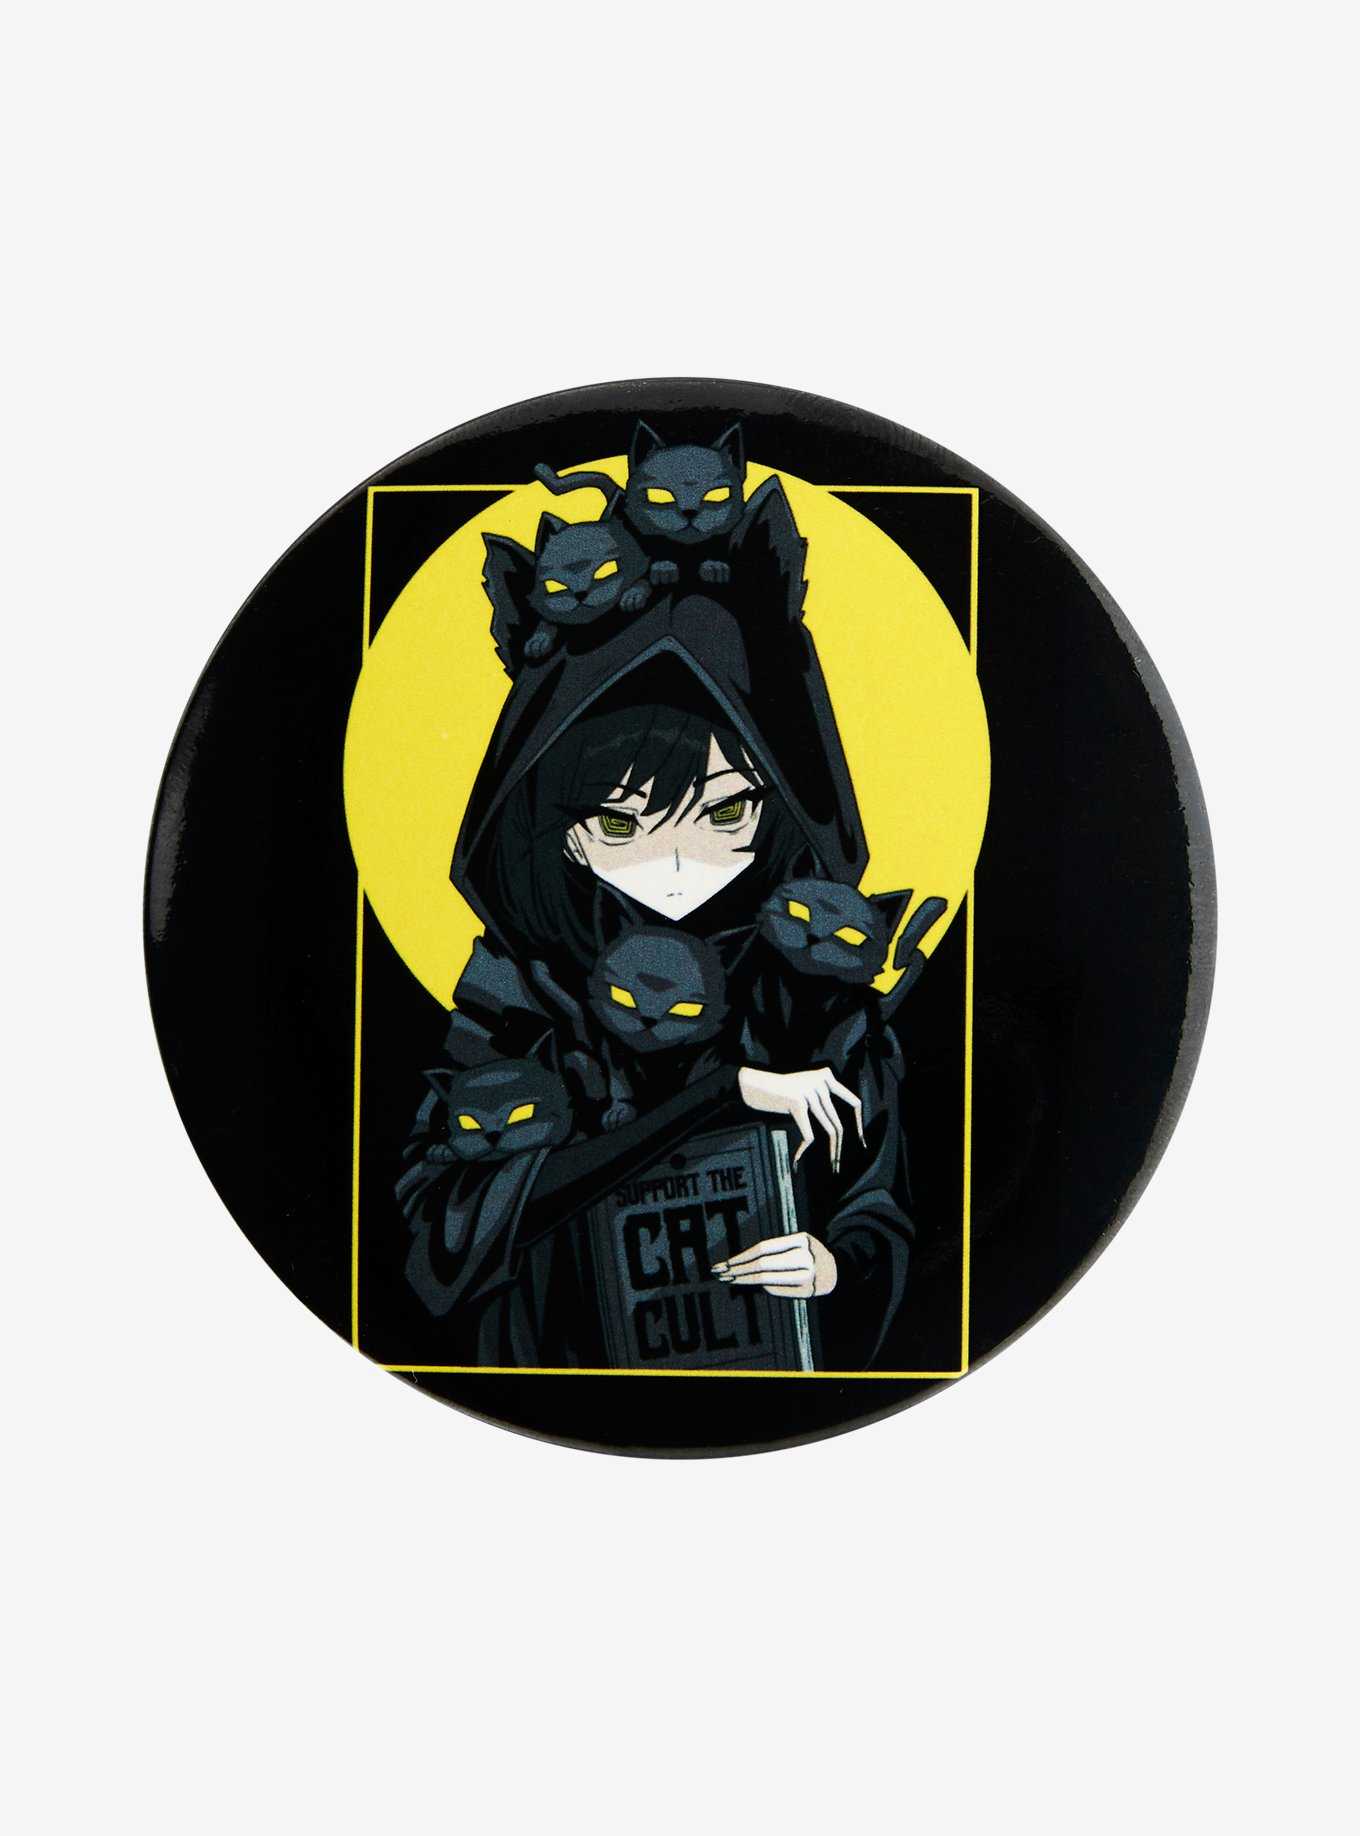 Cat Cult 3 Inch Button By Kawaii Krypt, , hi-res